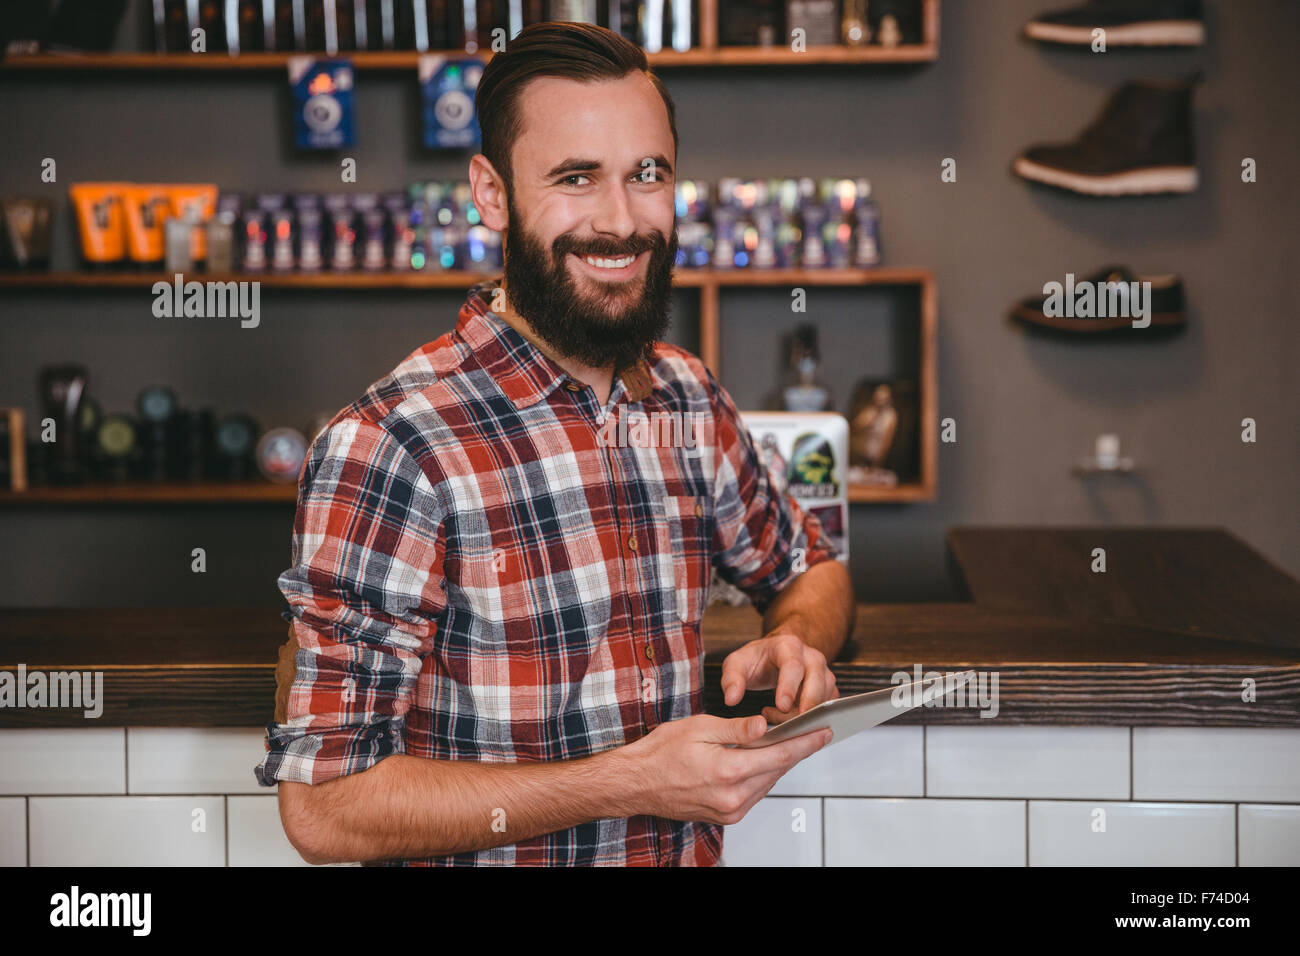 Handsome happy man with beard in plaid shirt using tablet in barbershop Stock Photo